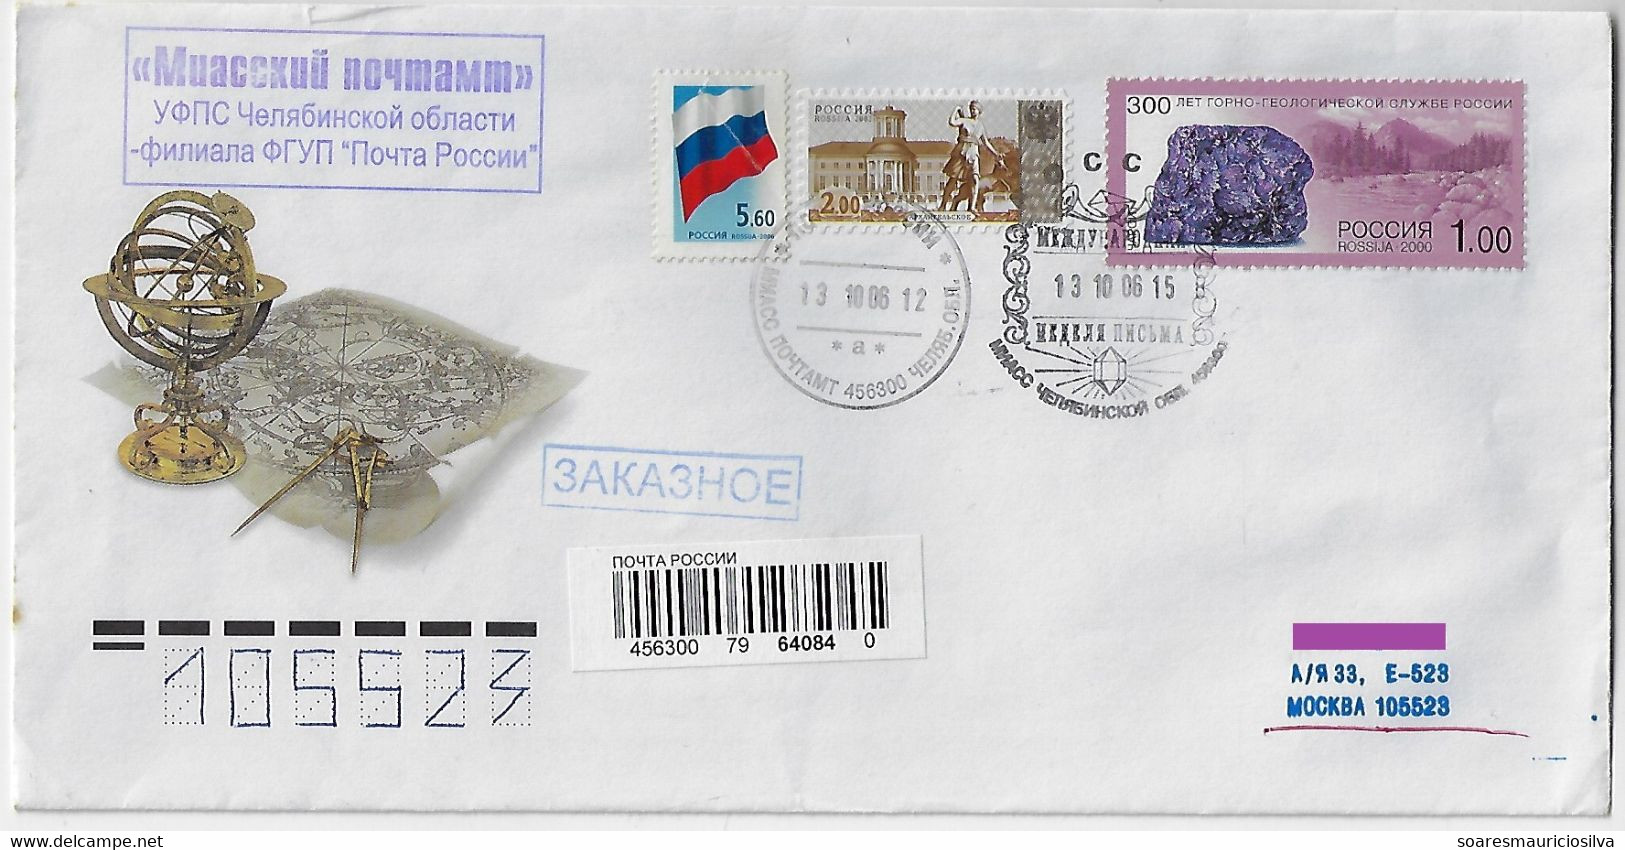 Russia 1996 Barcode Label Registered Cover Commemorative Cancel From Chelyabinsk Mineral Geology - Minéraux